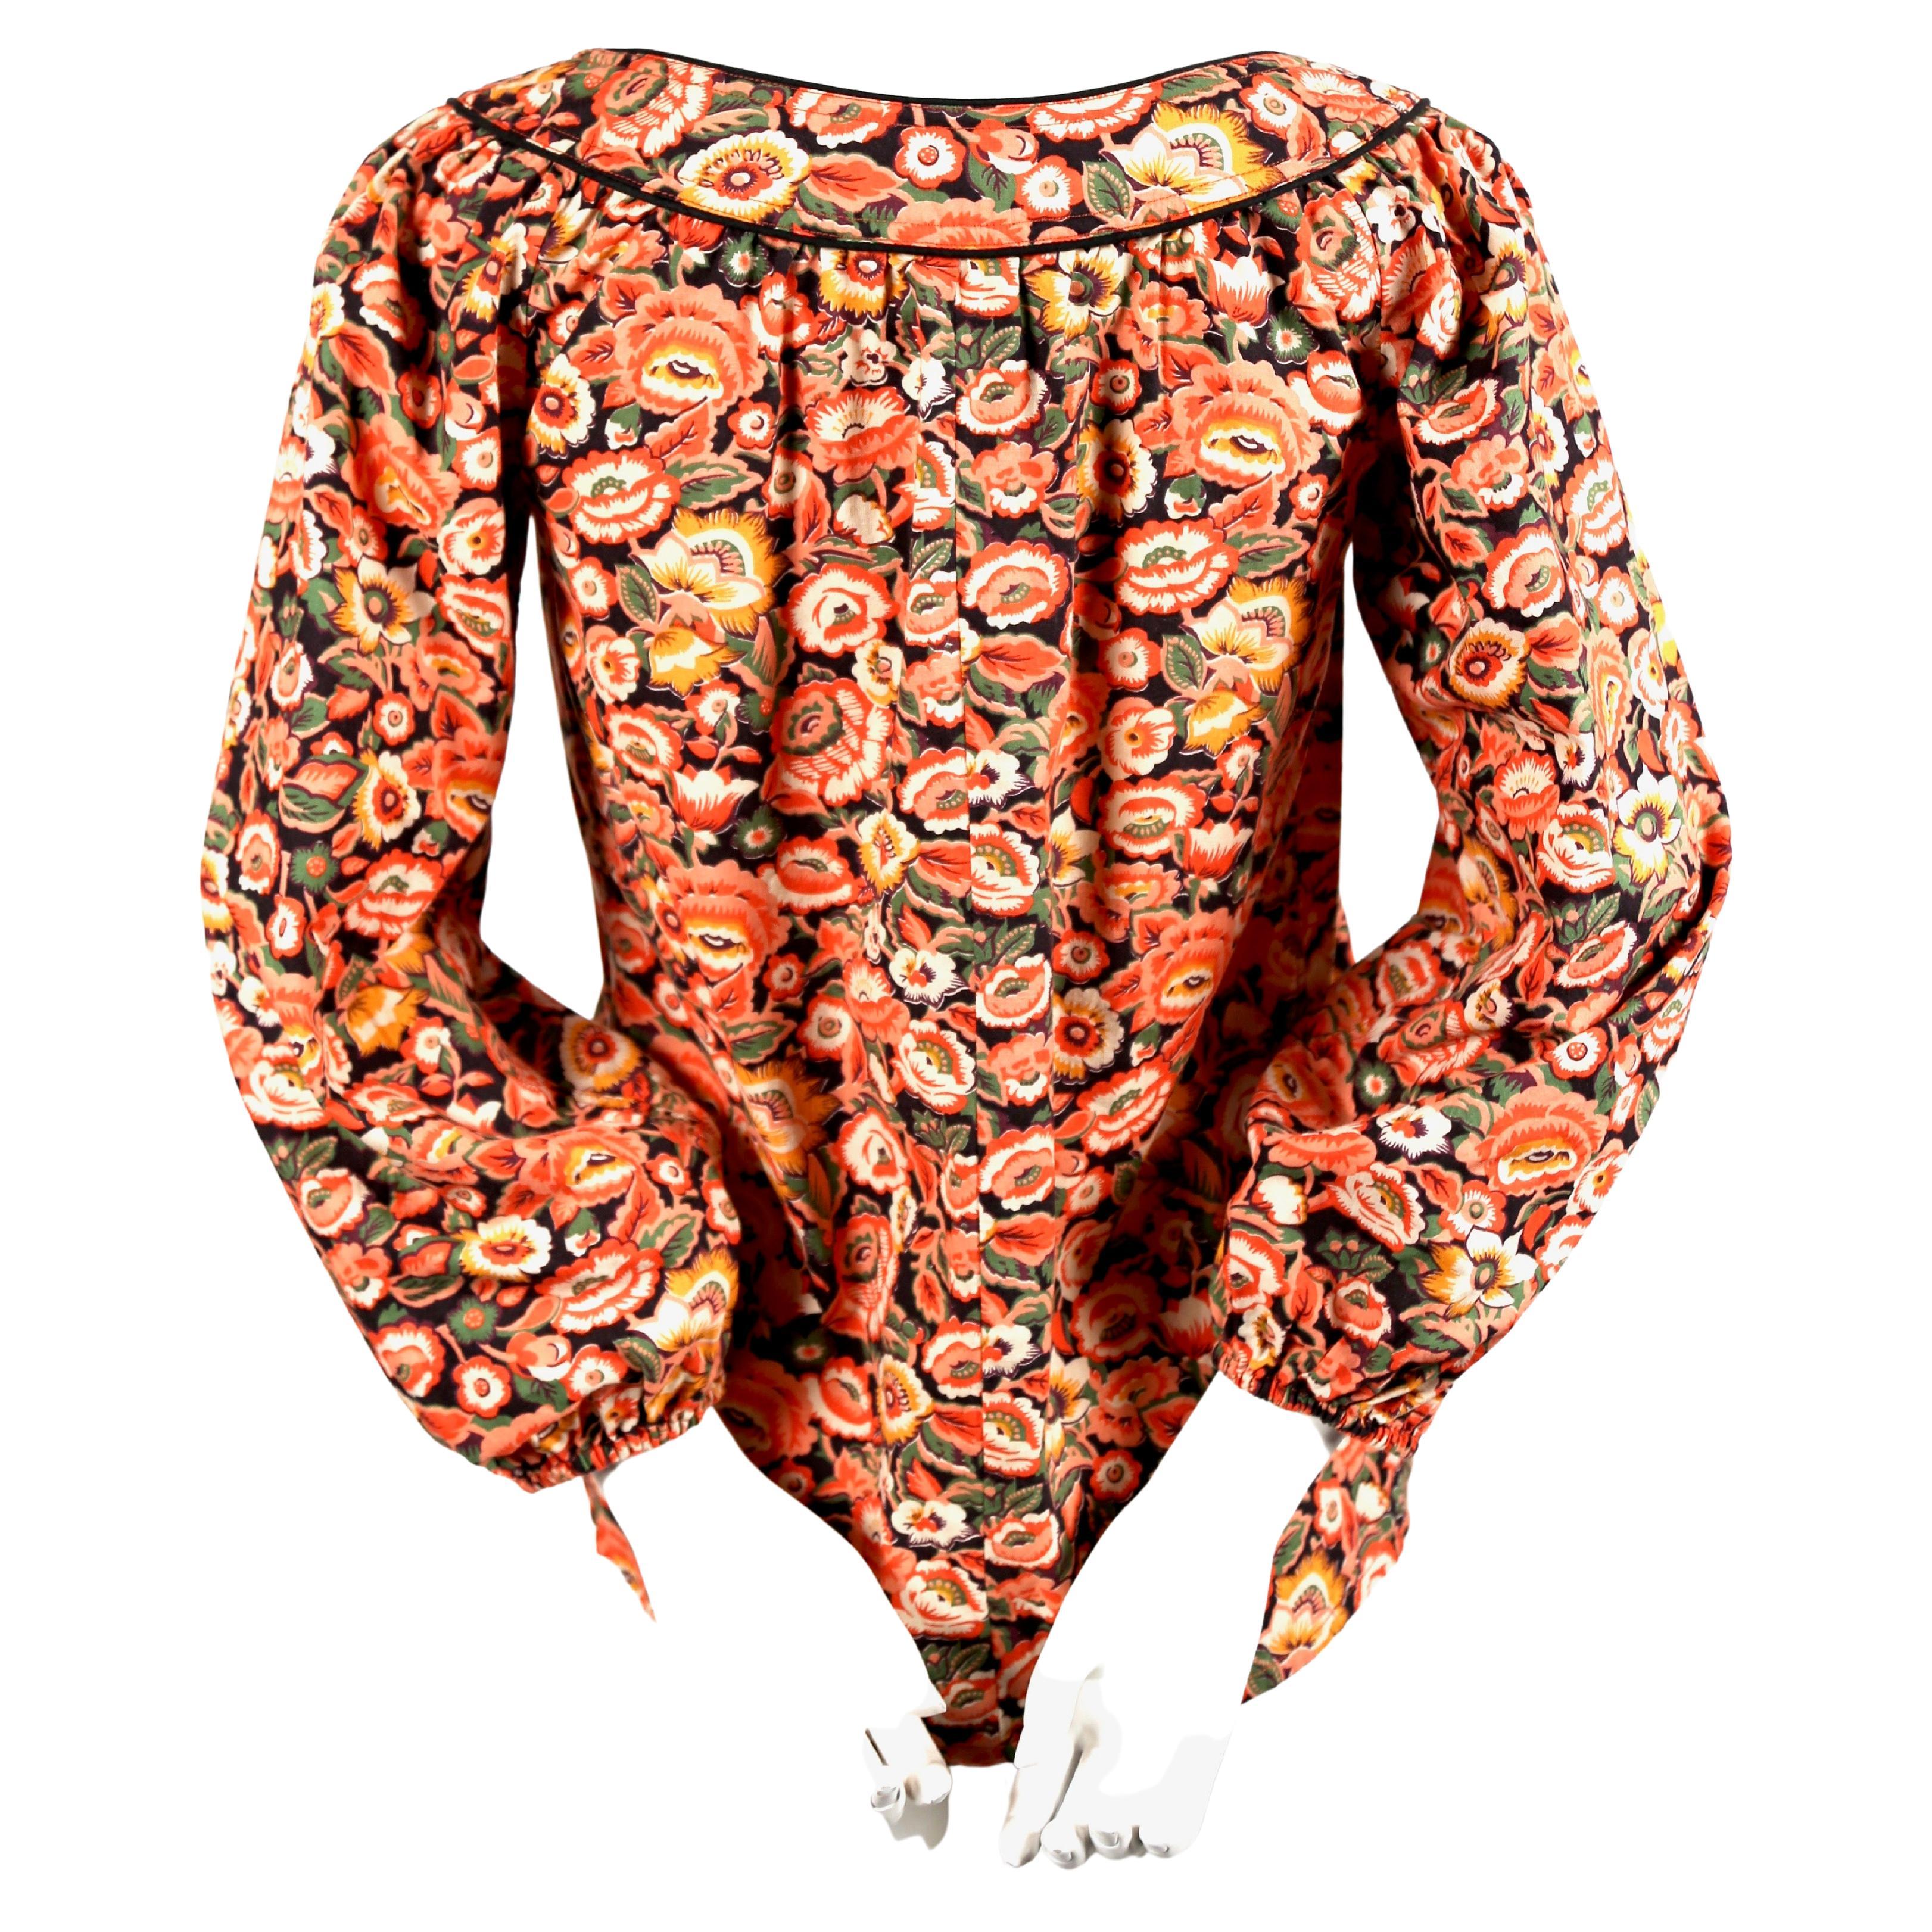 Vivid, floral-printed, cotton peasant shirt with black piping and elasticized cuffs designed by Yves Saint Laurent dating to the 1970's.  French size 34. Fits a size 2 or 4. Approximate measurements: shoulder 14-14.5